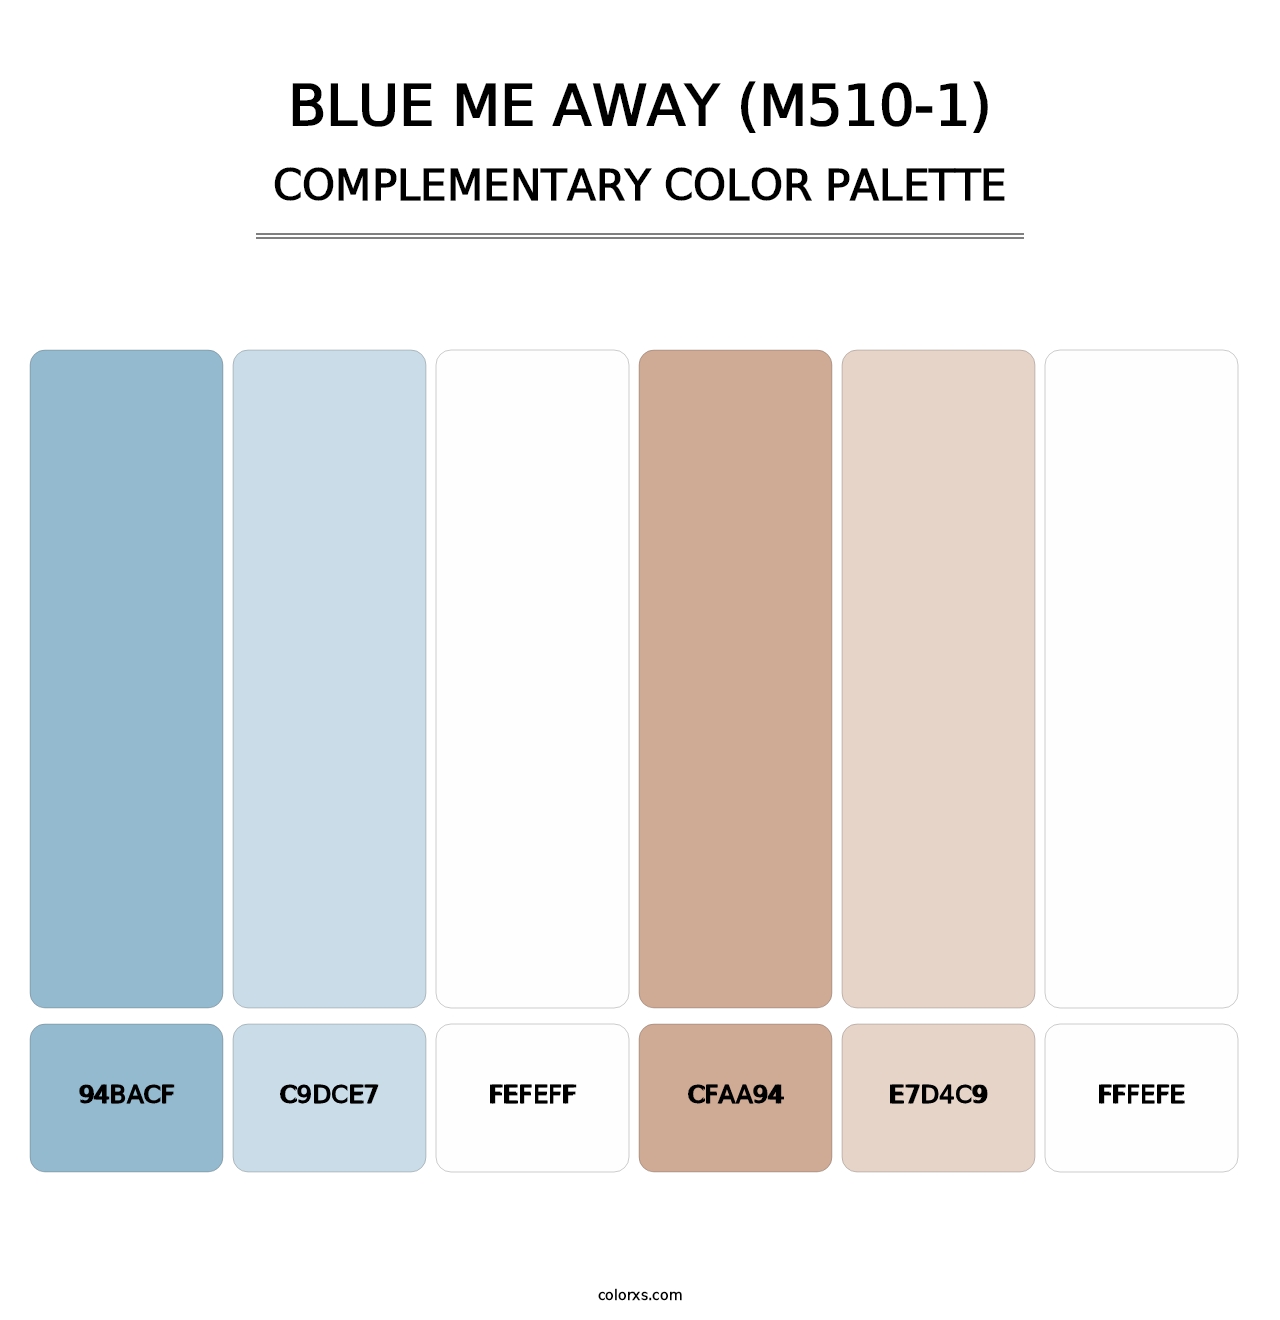 Blue Me Away (M510-1) - Complementary Color Palette